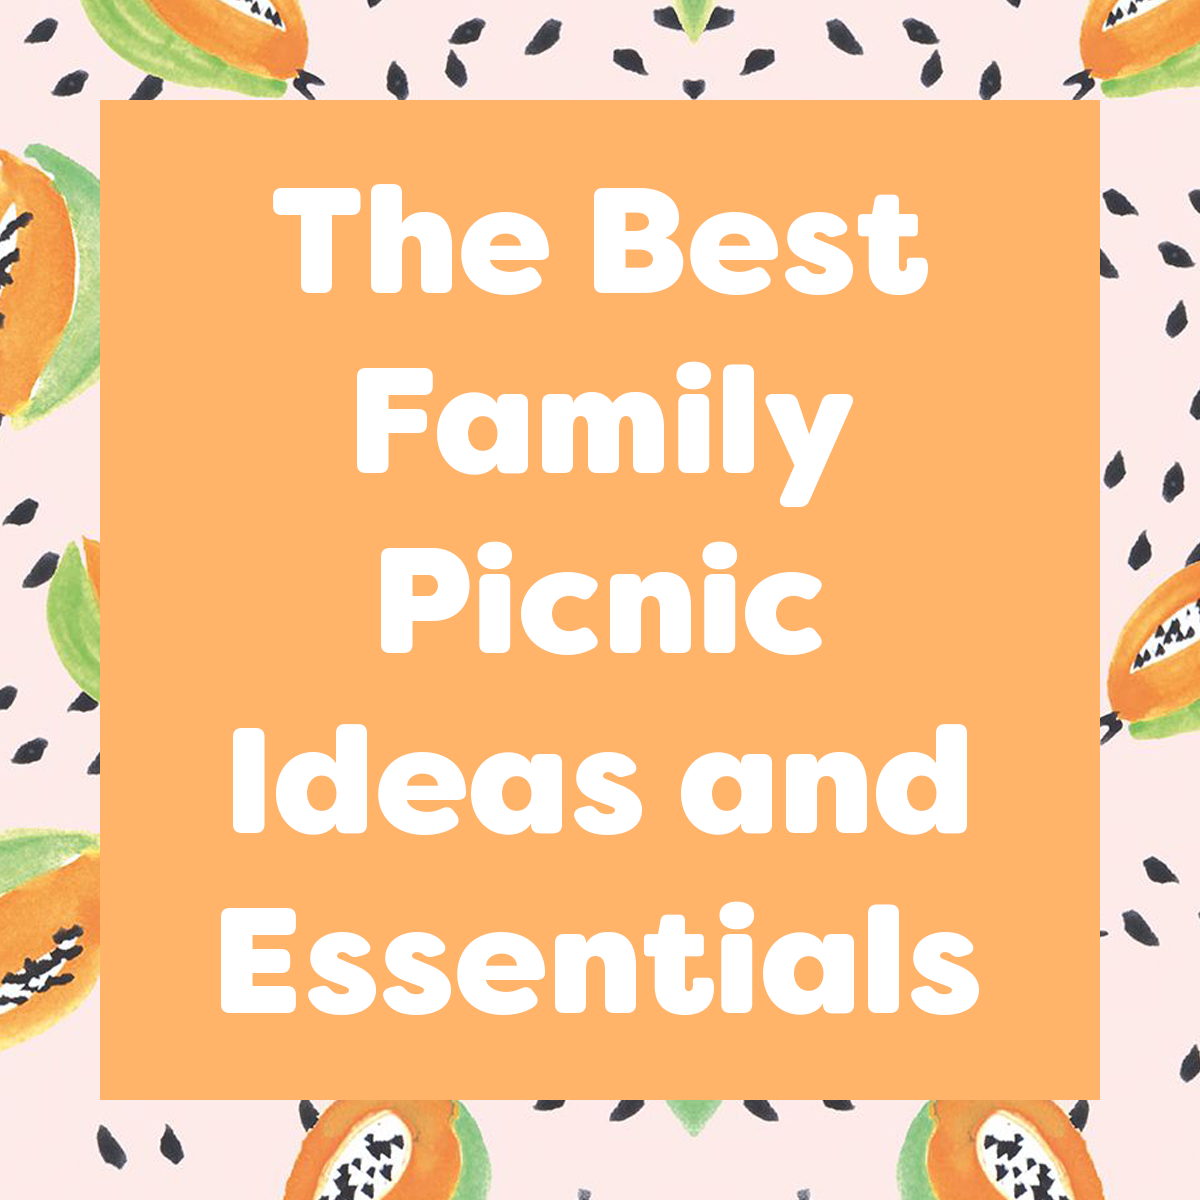 The Best Family Picnic Ideas and Essentials